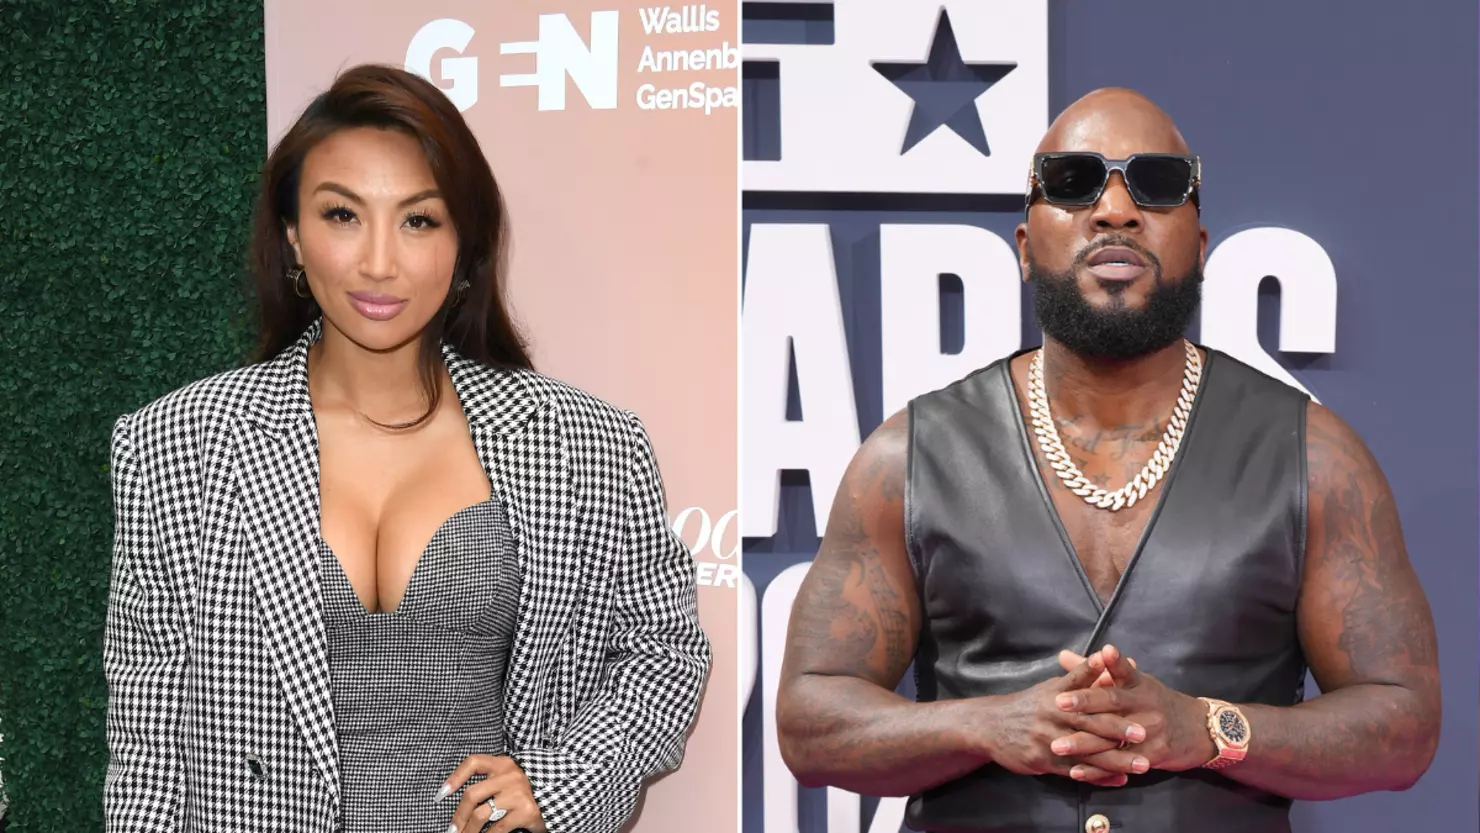 Jeannie Mai says Jeezy cheated and she wants a clause in their prenup enforced